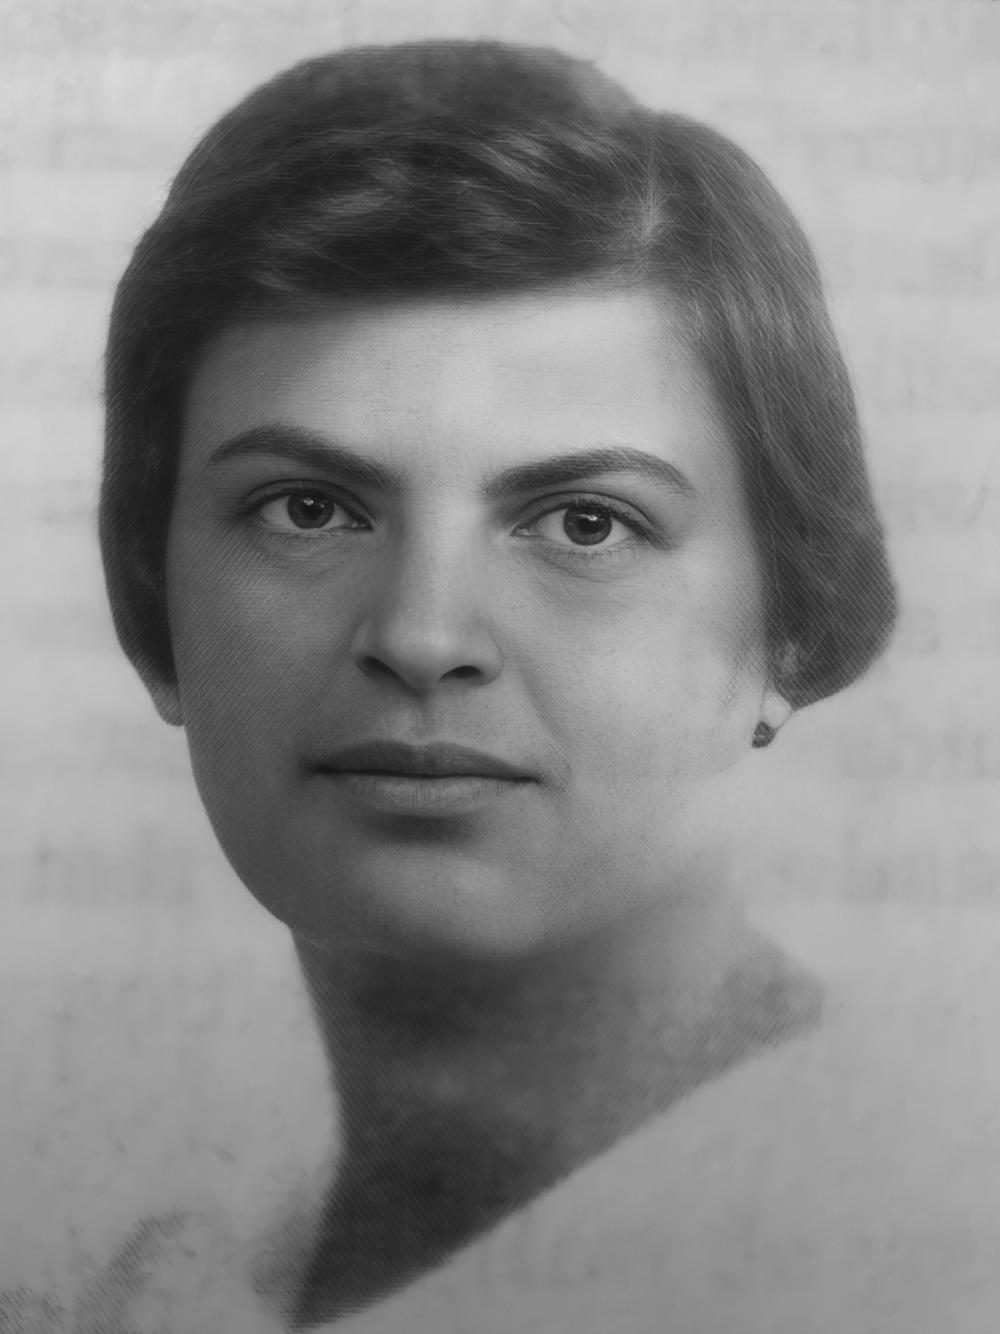 Nadya Ulanovskaya, shown here in her late 20s in 1932, worked as a translator for Western journalists in Moscow during World War II. Ulanovskaya worked for the Soviet state for many years, but became disenchanted with dictator Josef Stalin. She sought to tell Western journalists about the reality in her country, and was imprisoned for eight years for providing 'state secrets' to foreigners.